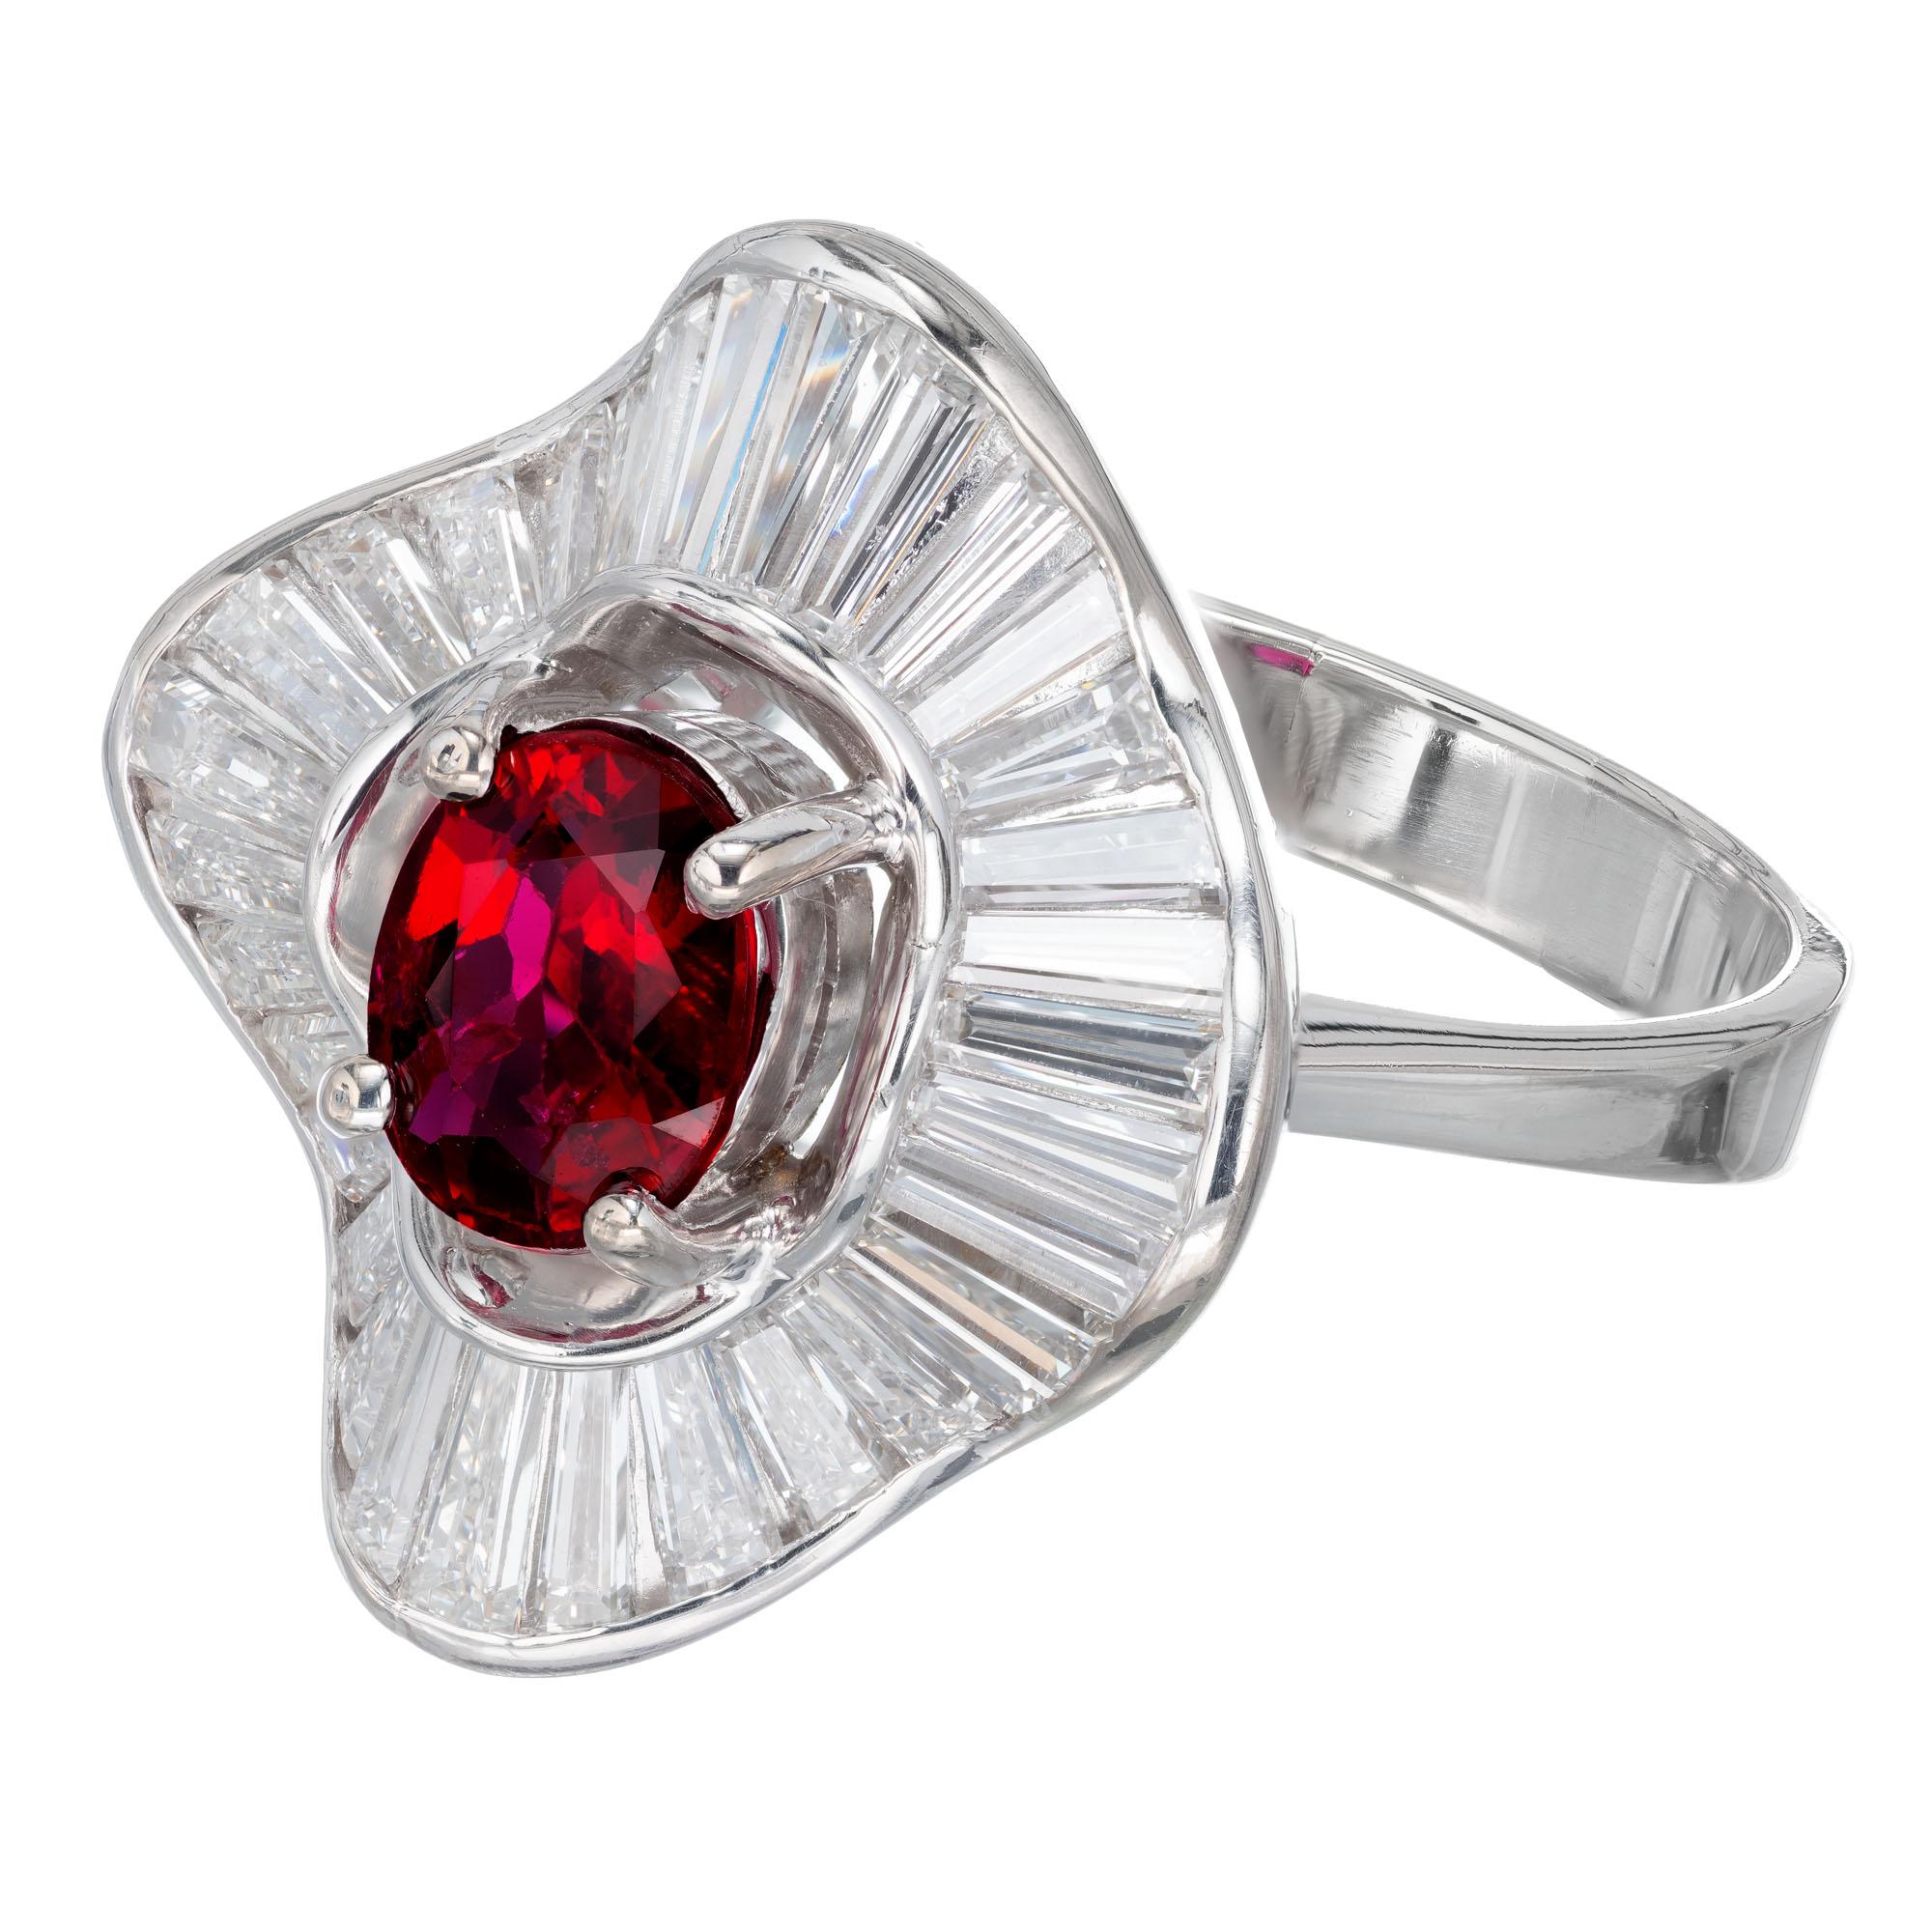 GIA certified Ruby and diamond ballerina cocktail ring. Oval center ruby with a halo of 32 tapered baguette diamonds, in a 14k white gold ballerina setting. GIA Certified natural conundrum ruby simple heat only. 

1 oval red ruby, approx. .92ct GIA